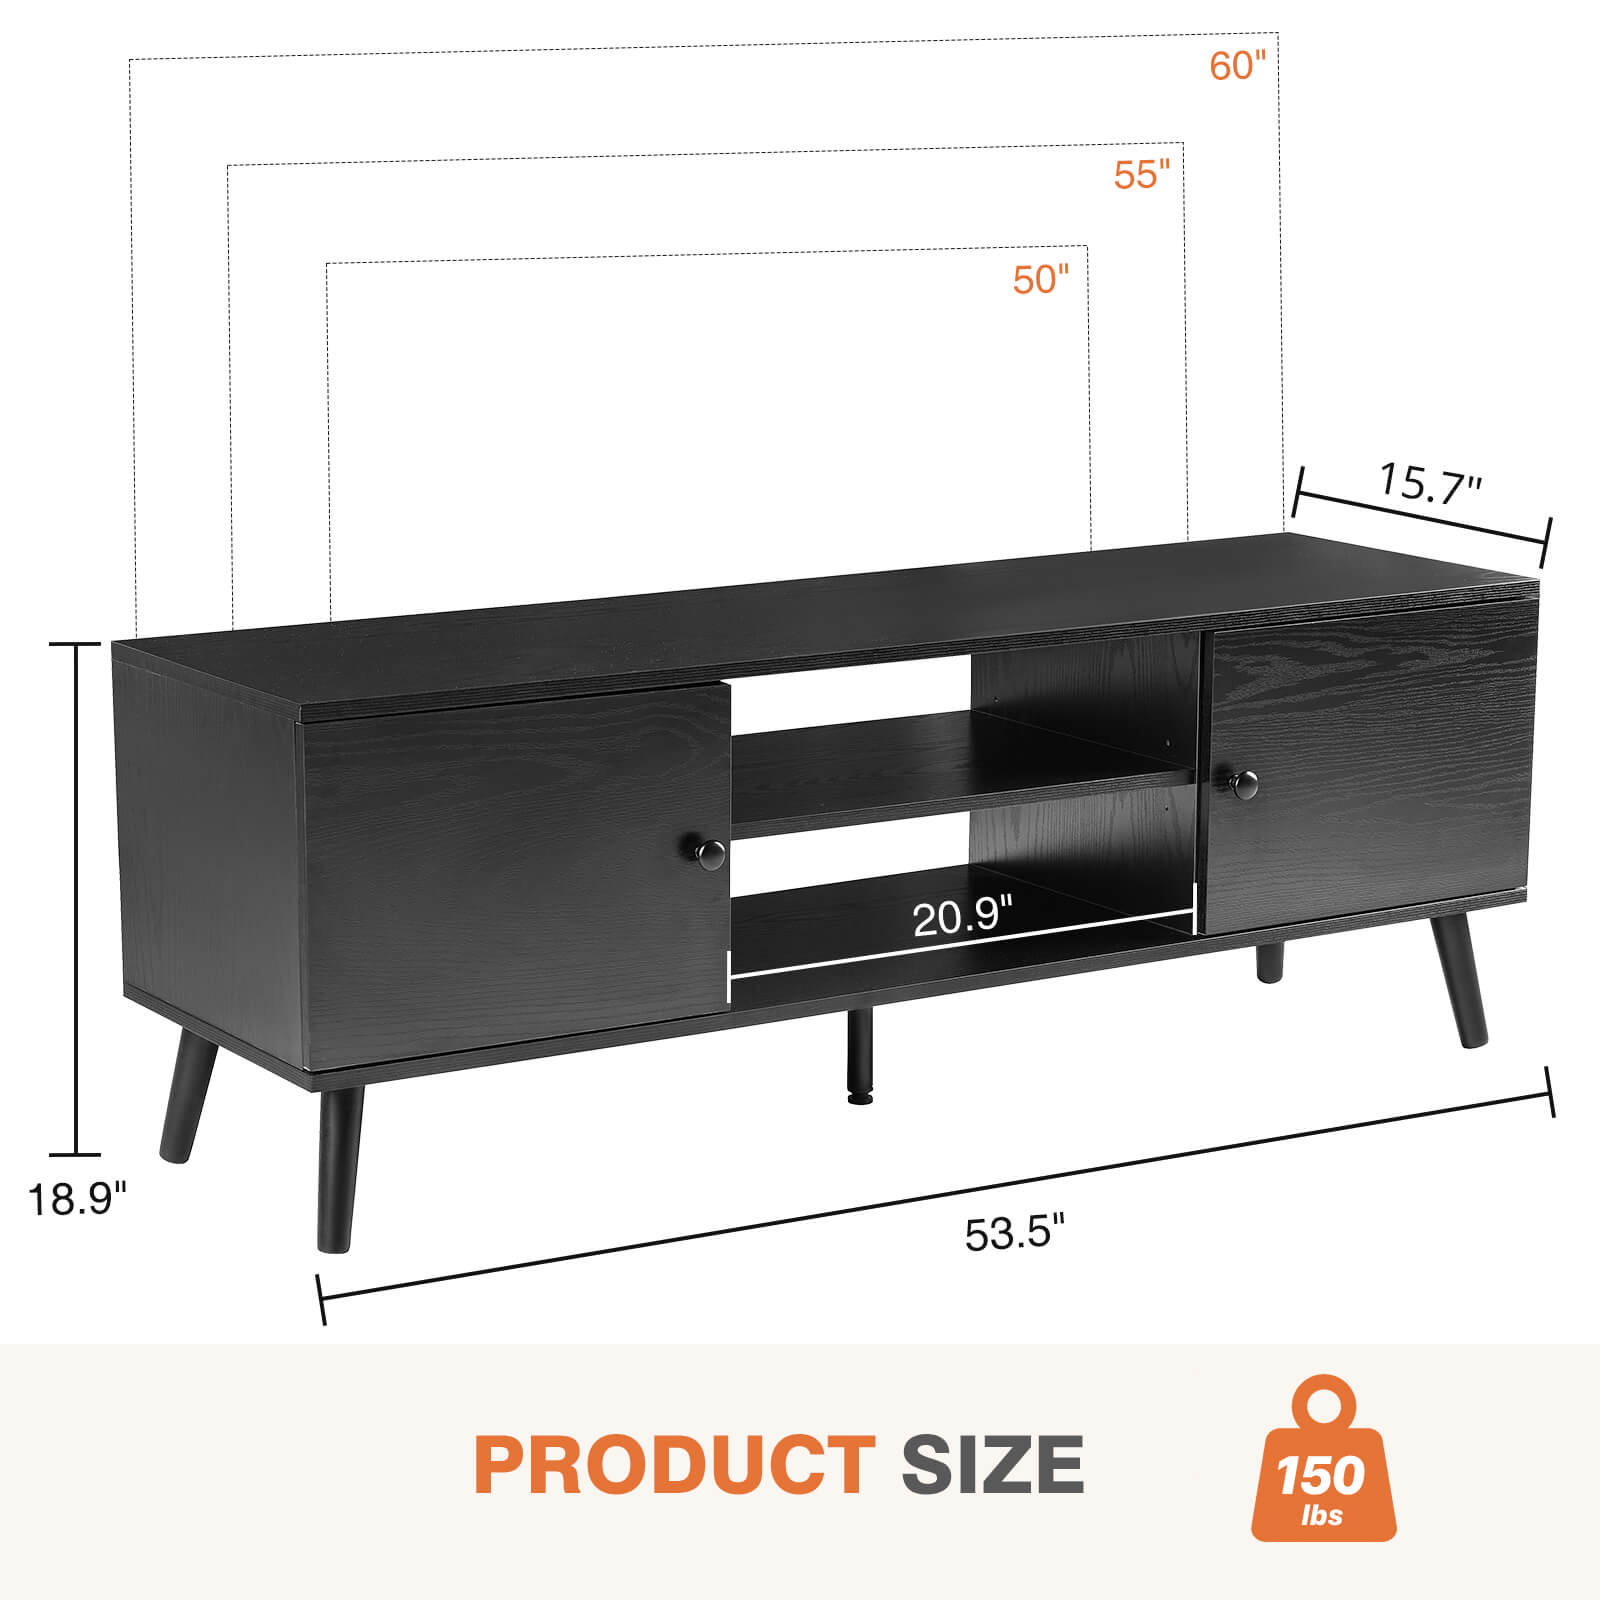 Wooden TV stand - for TVs up to 60 inches with adjustable shelves with double storage cabinets for living room, bedroom, patio, etc.